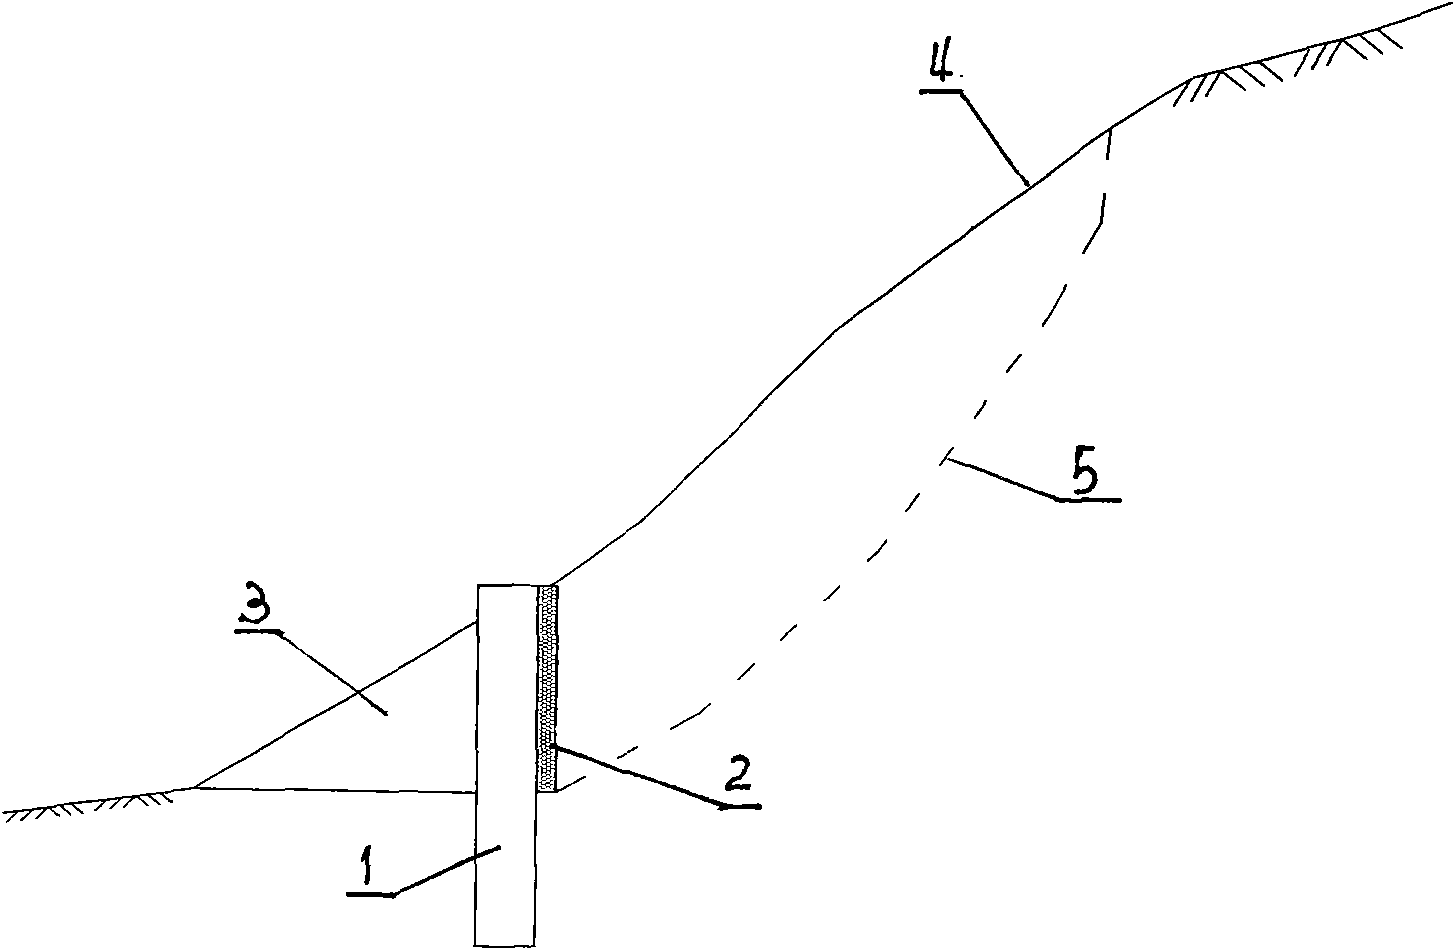 High cutting slope advanced supporting construction method